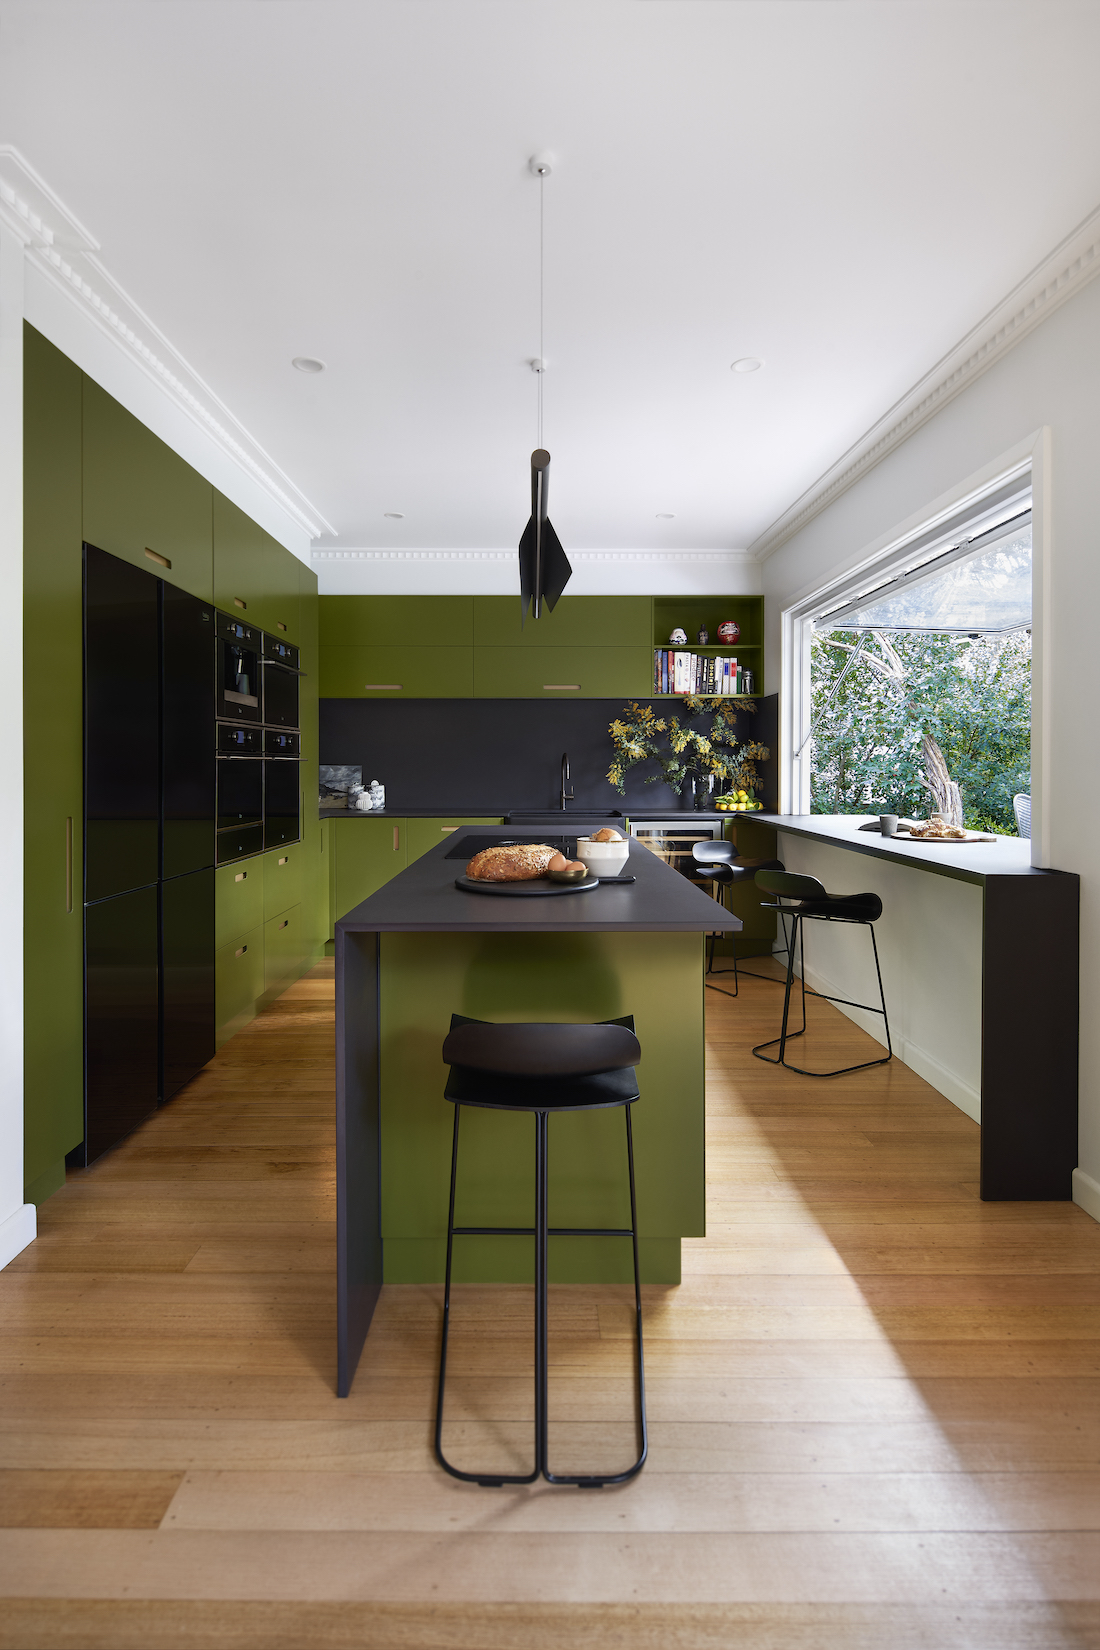 Green kitchen cabinetry